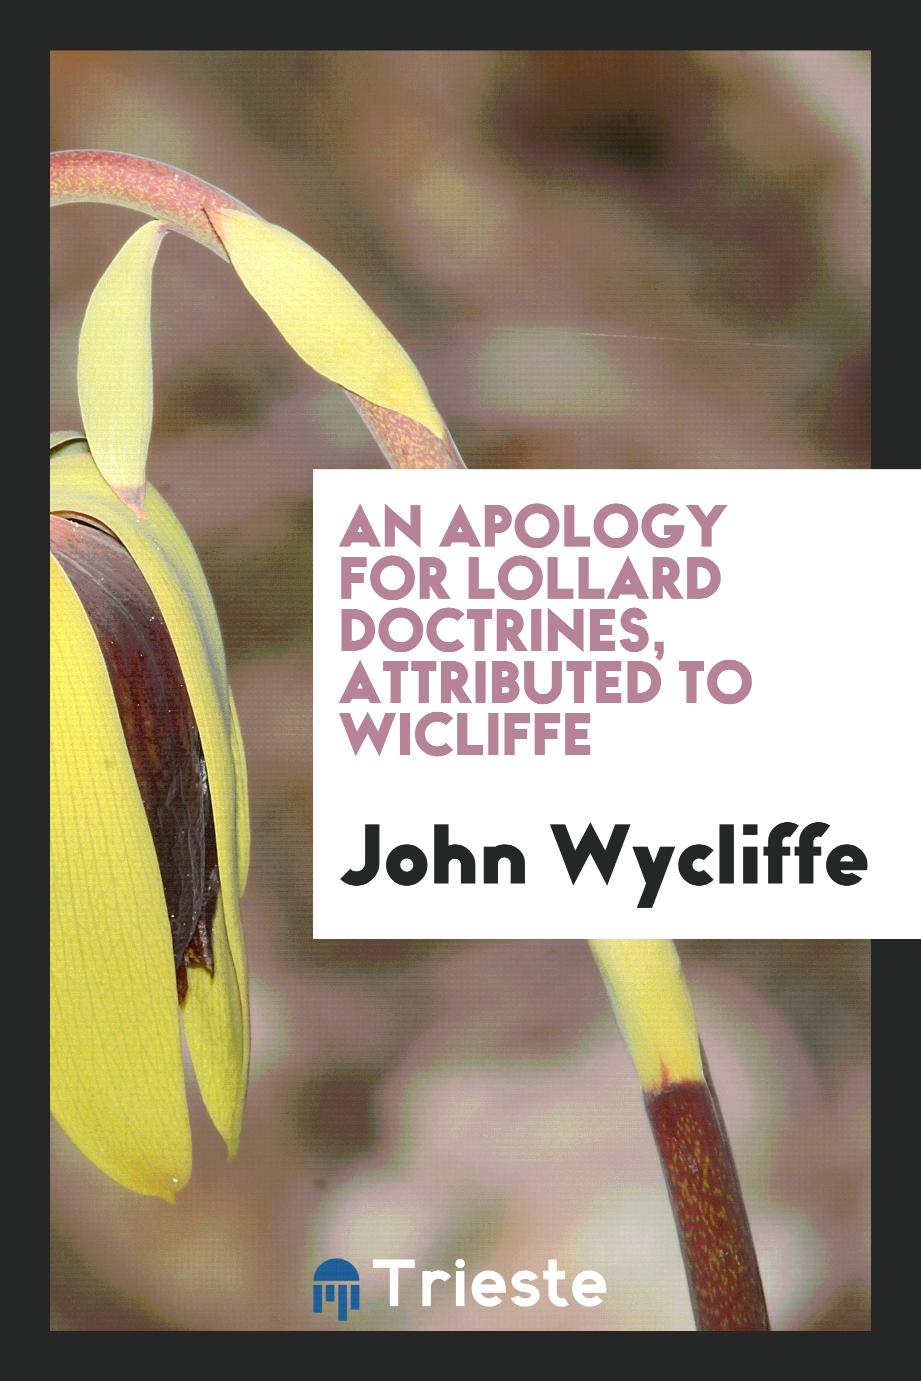 An apology for Lollard doctrines, attributed to wicliffe